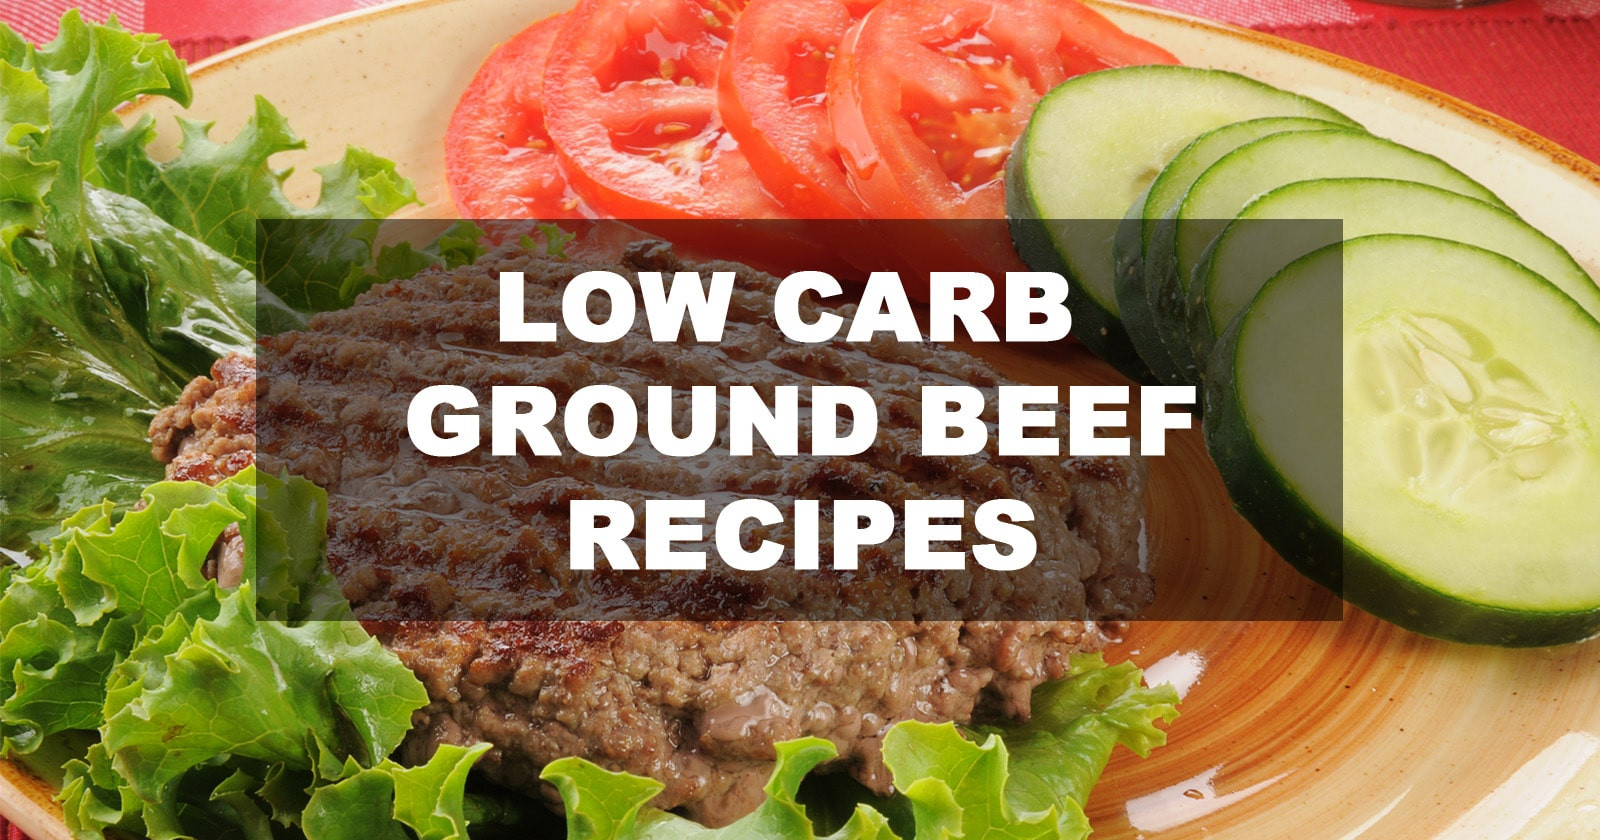 Low Calorie Meals With Ground Beef
 Best Low Carb Ground Beef Recipes October 2018